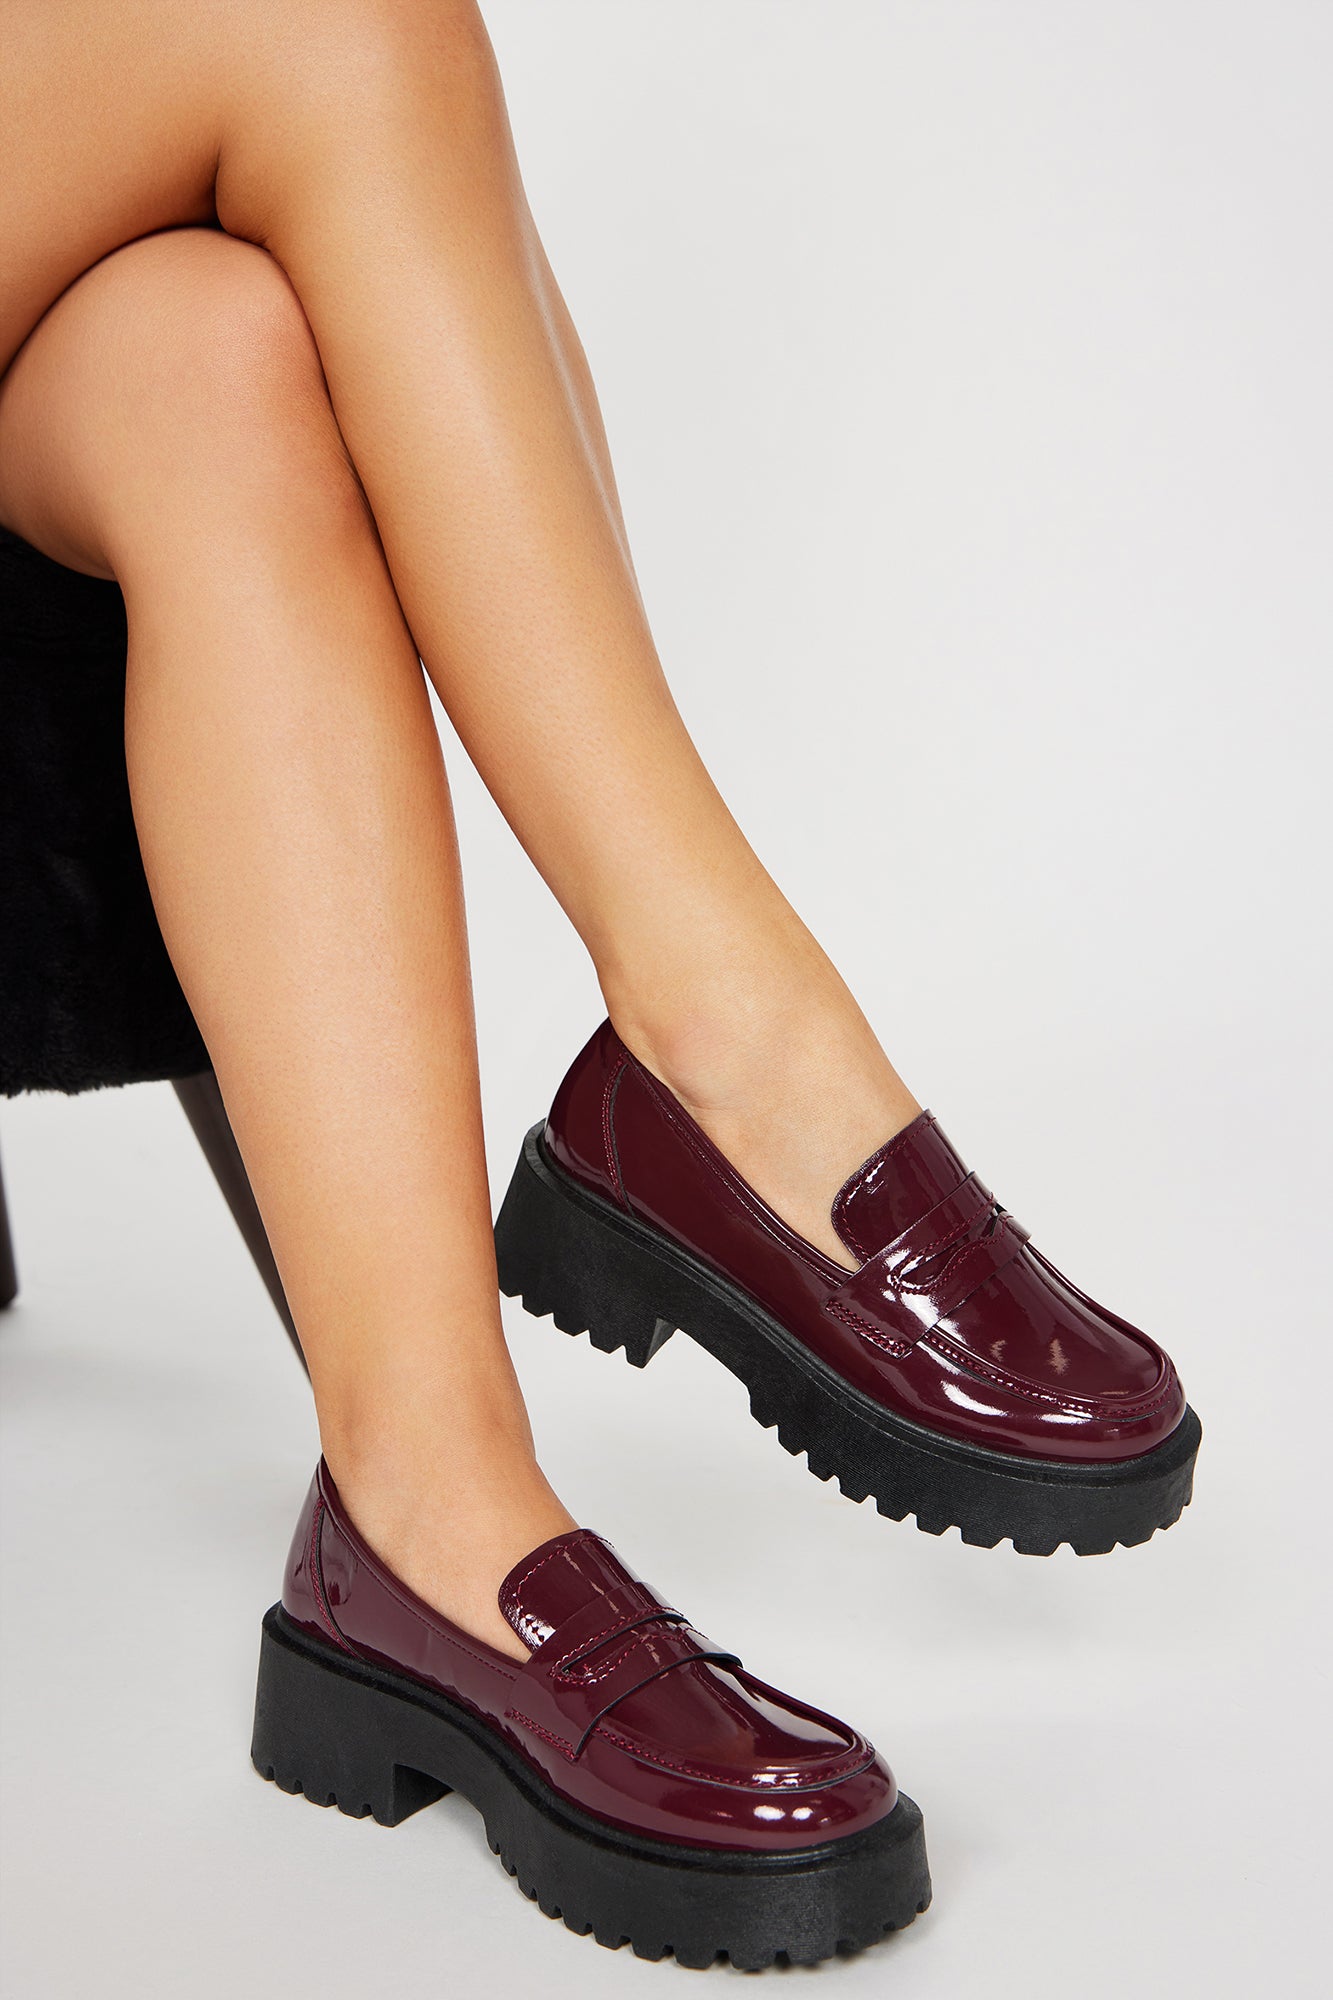 Step Into Fall With These 9 Chic Loafers – CR Fashion Book